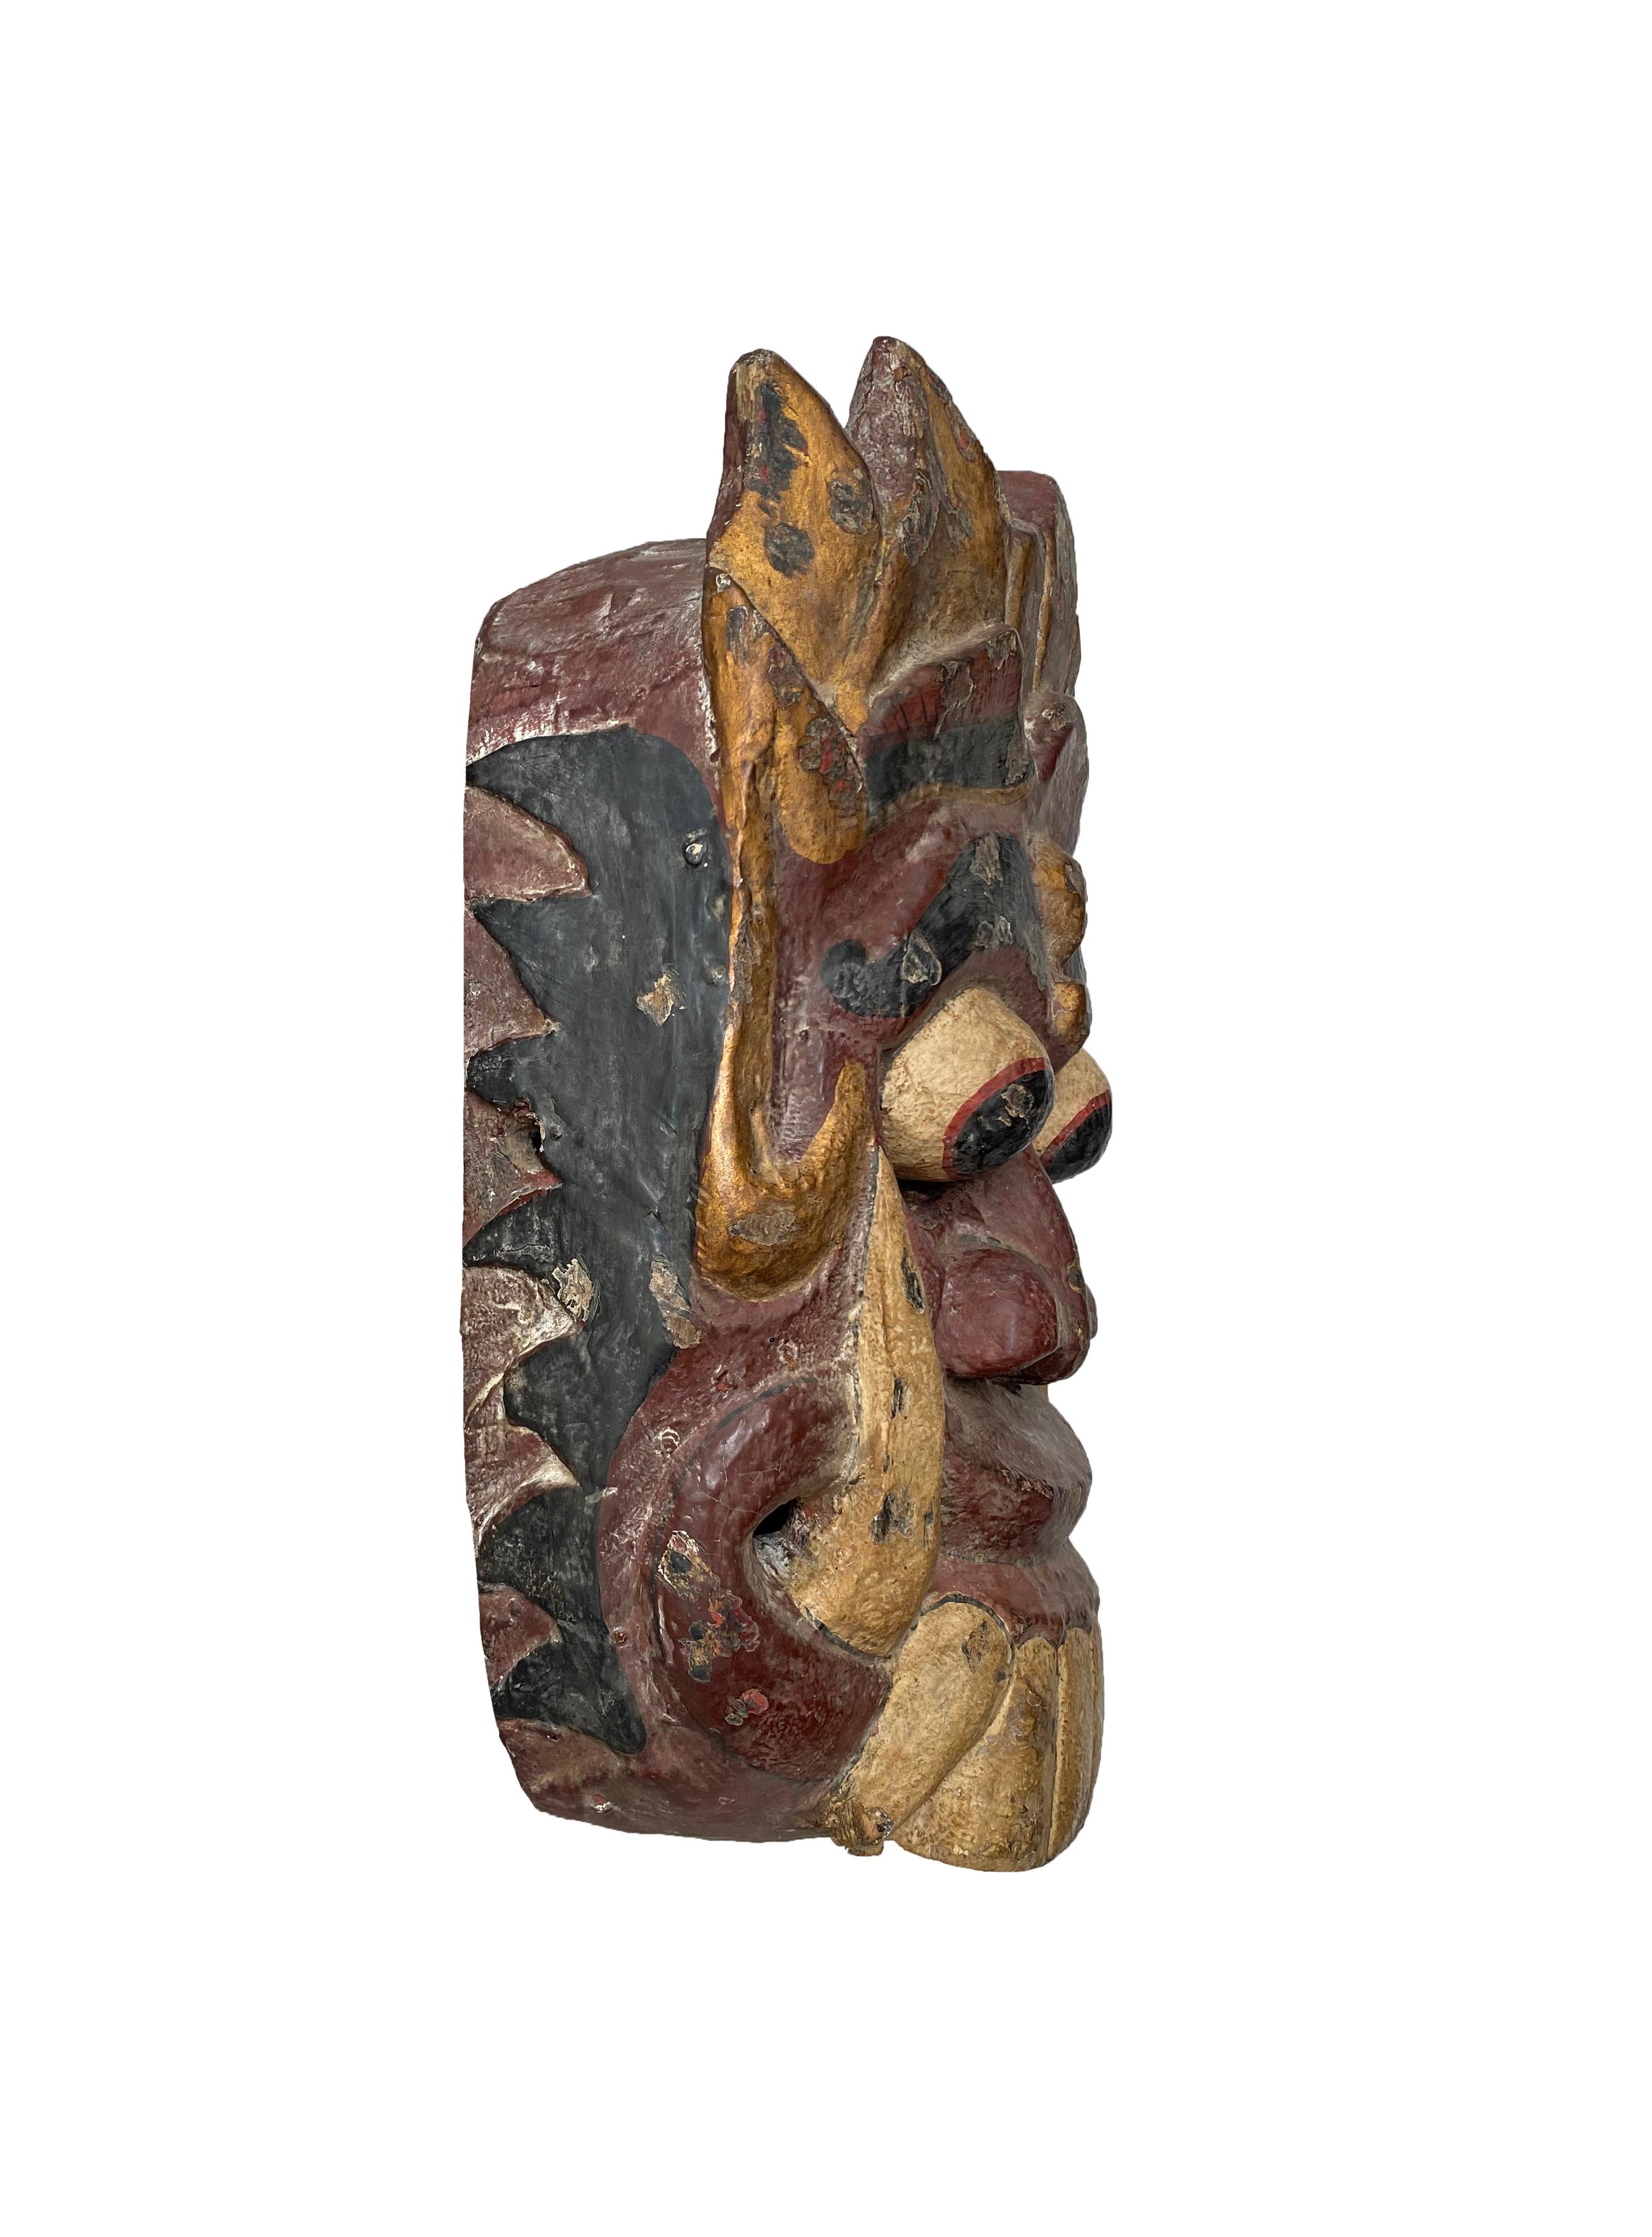 This hand-carved mask originates from the island of Bali and depicts Rangda, the Demon Queen of Balinese Hindu Mythology. This mask would've been used in ceremonies and/or dance performances. It features a mix of burgundy, gold and white polychrome